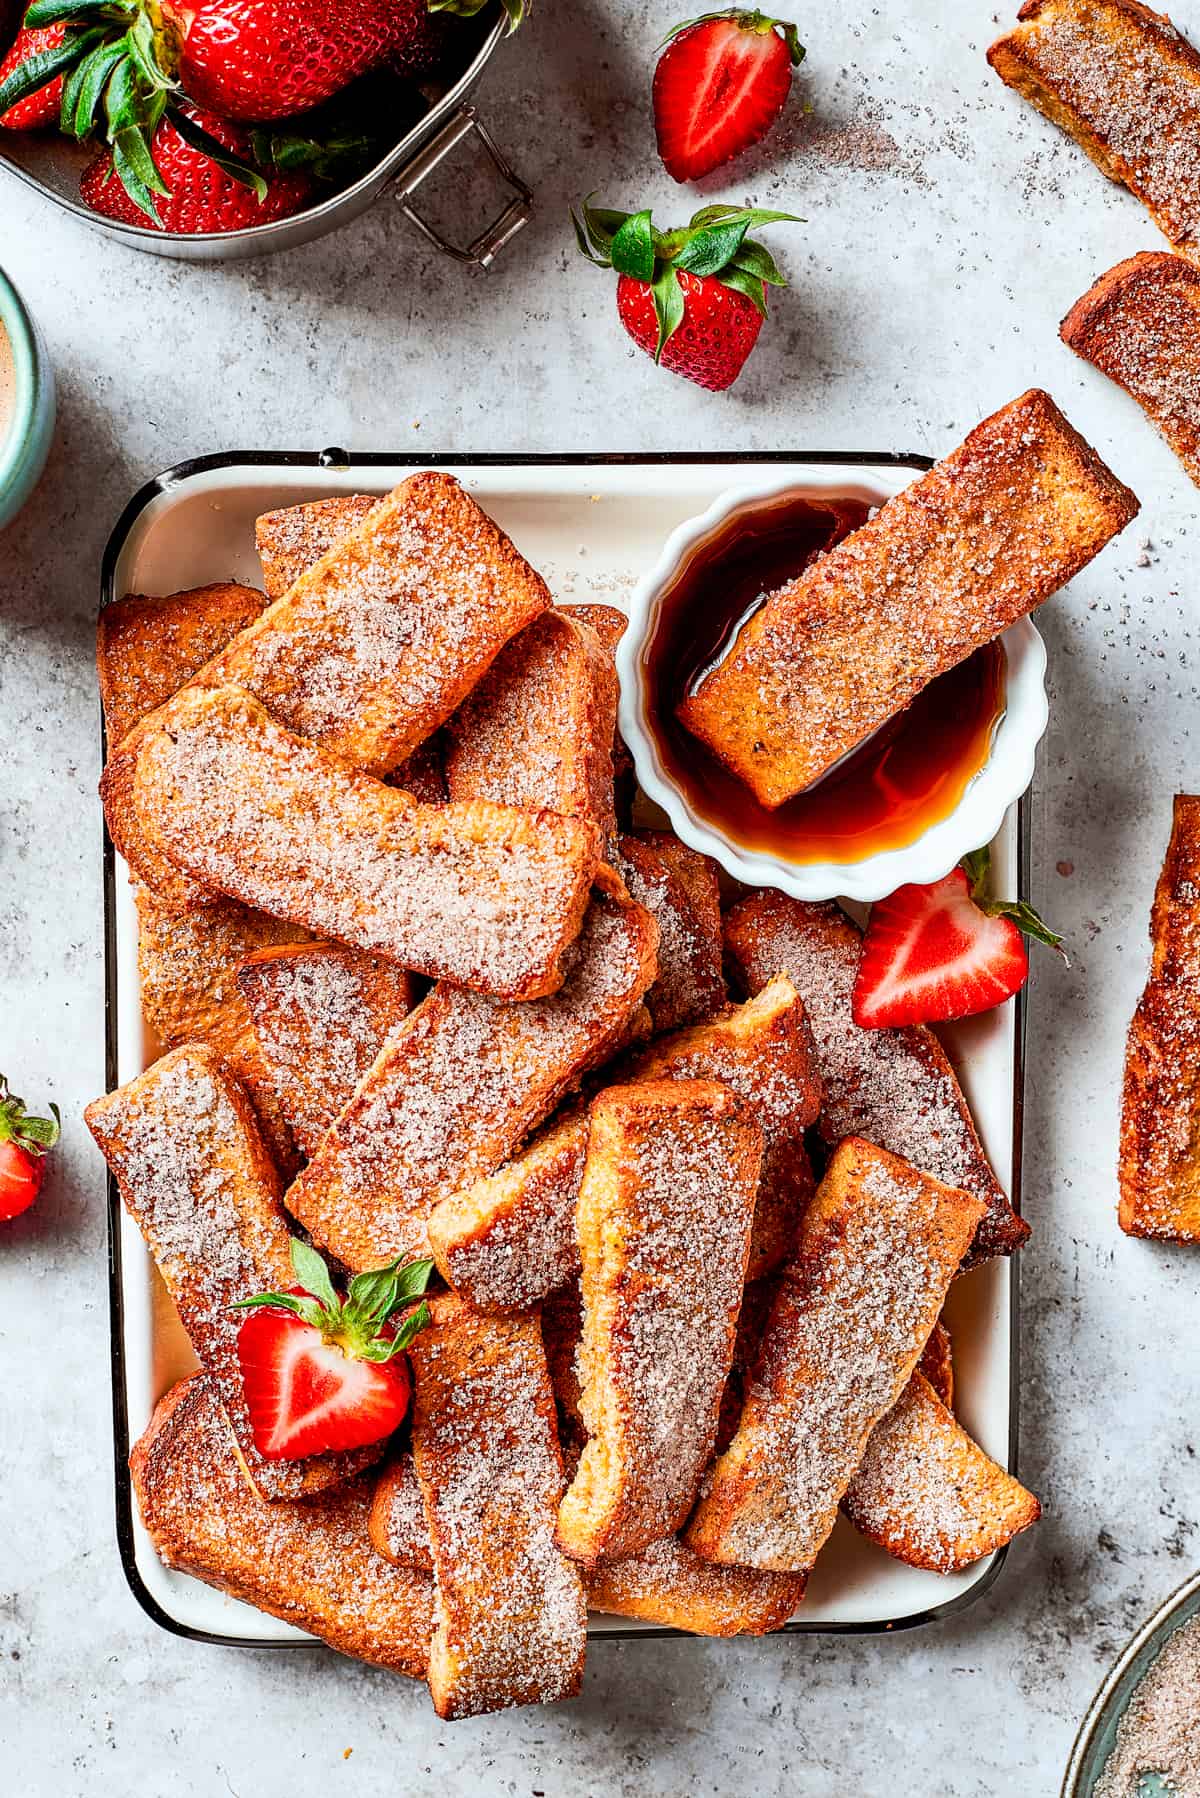 A tray of French toast sticks with maple syrup and strawberries. One stick is dunked in the syrup.